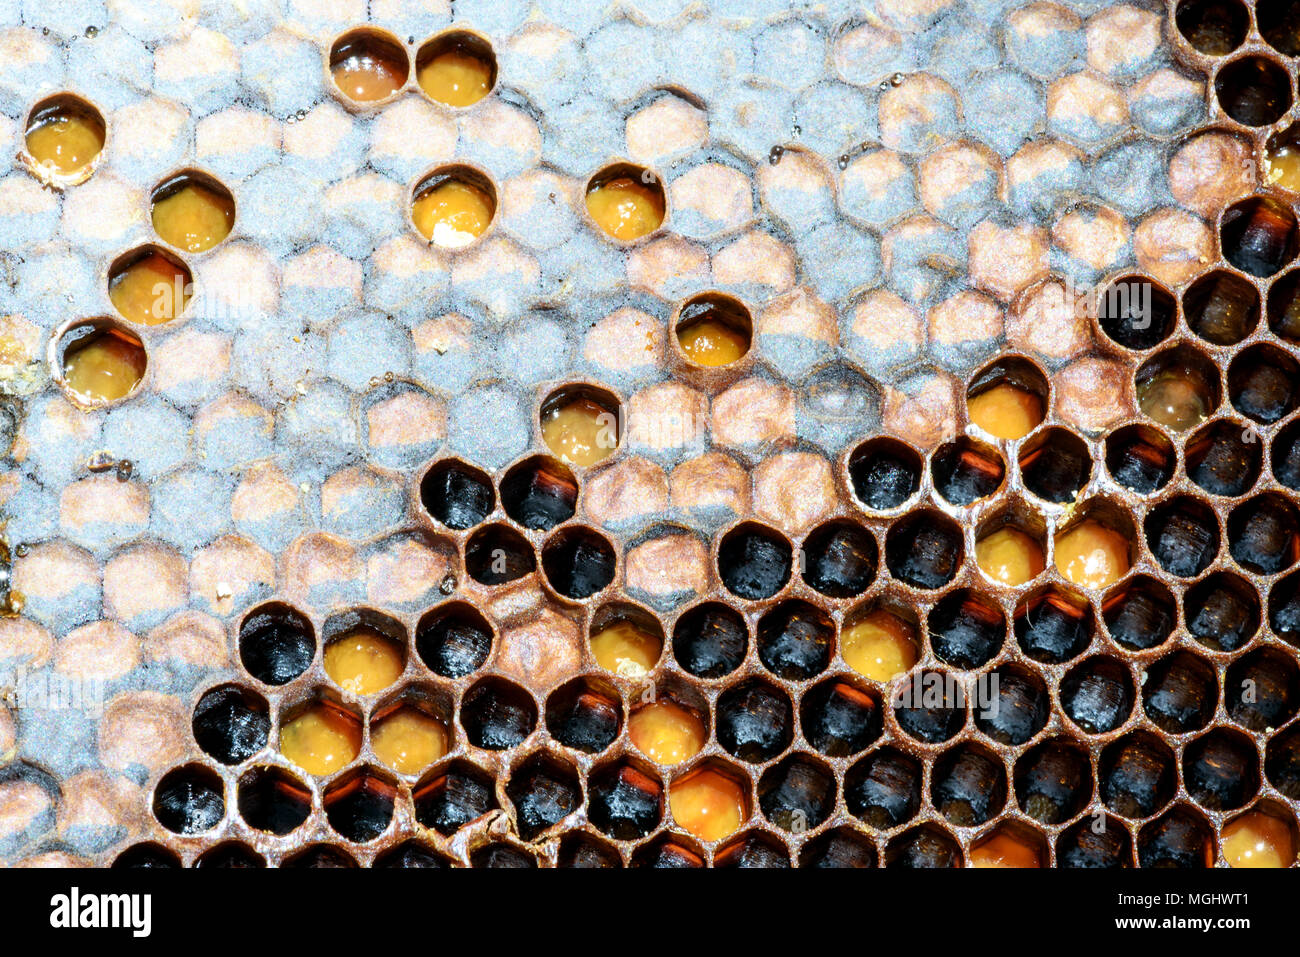 Closeup macro of yellow bee honeycomb in a hexagon pattern with sealed golden sweet honey compartments of the hive interior found wild in nature Stock Photo